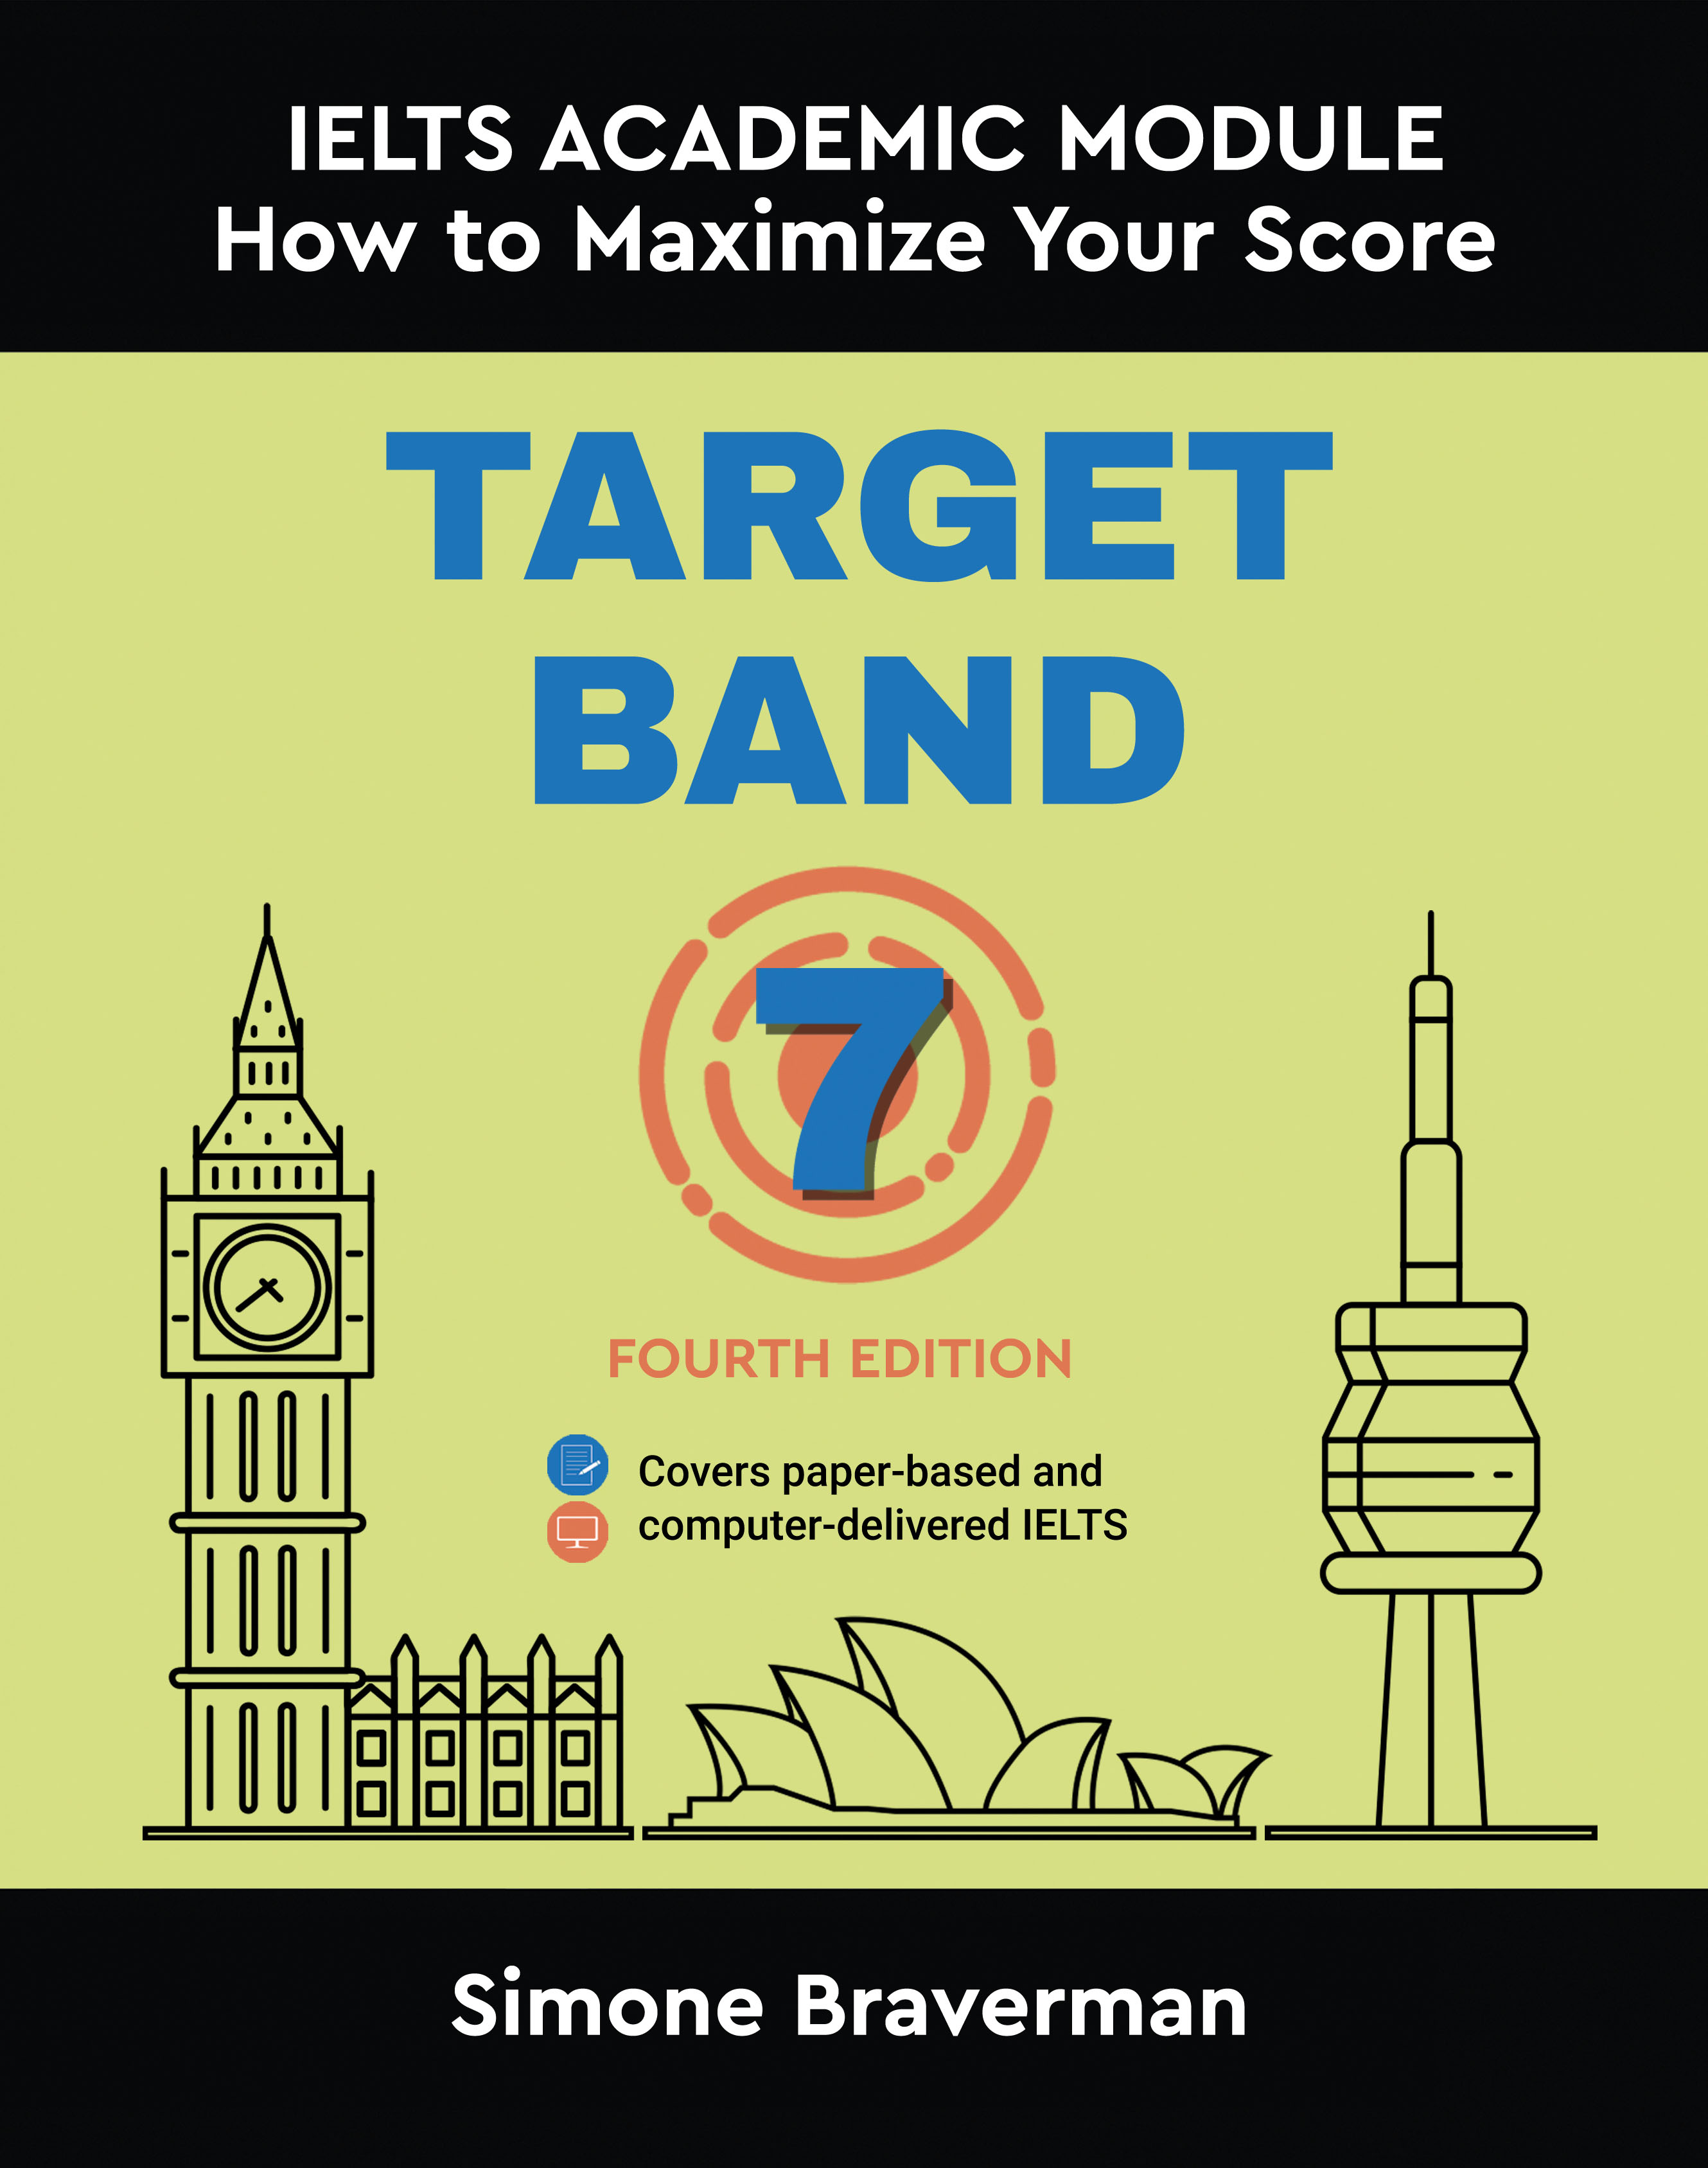 Target Band 7 book for Academic IELTS